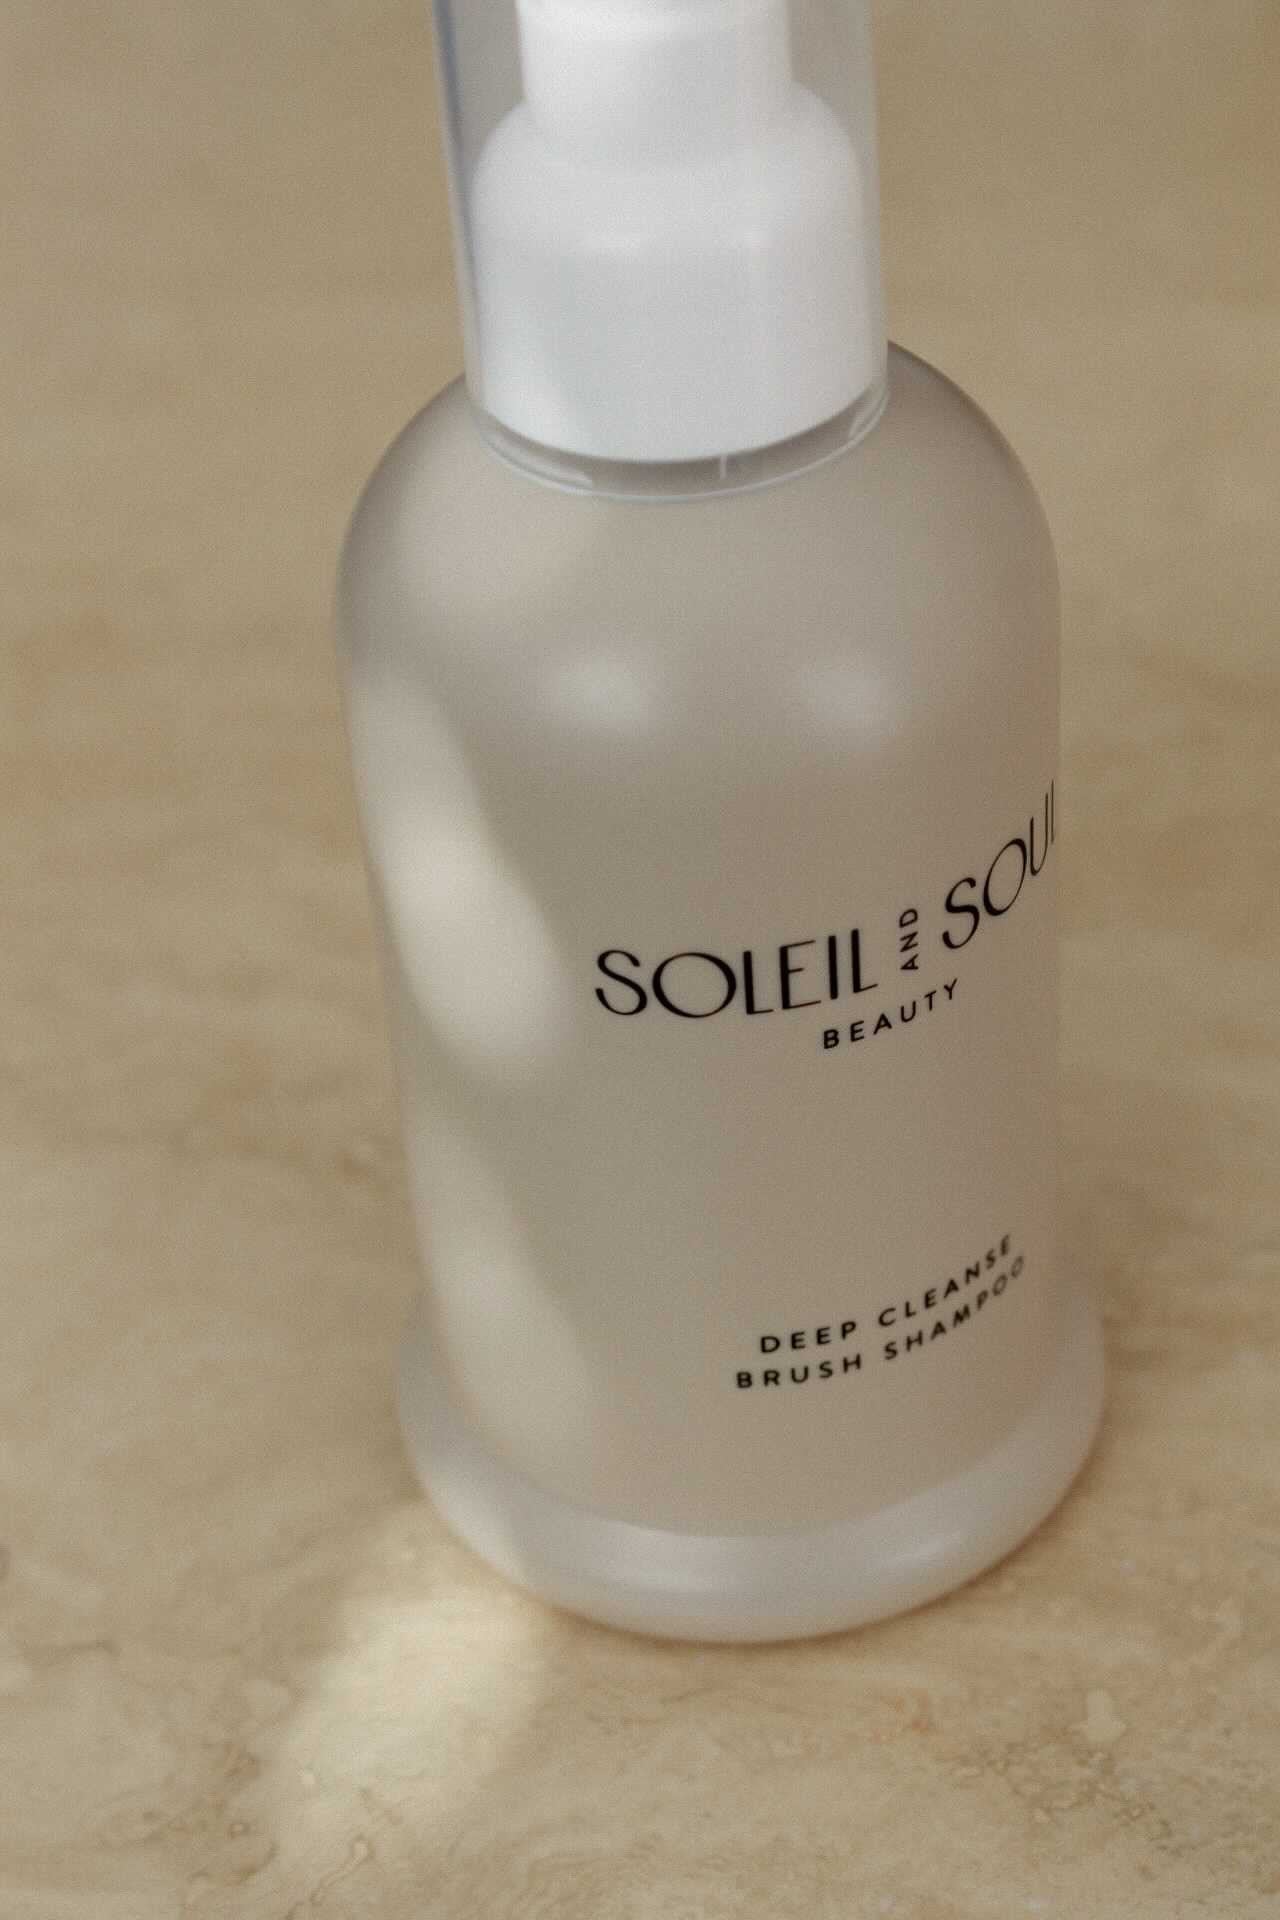 Deep Cleanse Brush Shampoo - Soleil and Soul Beauty